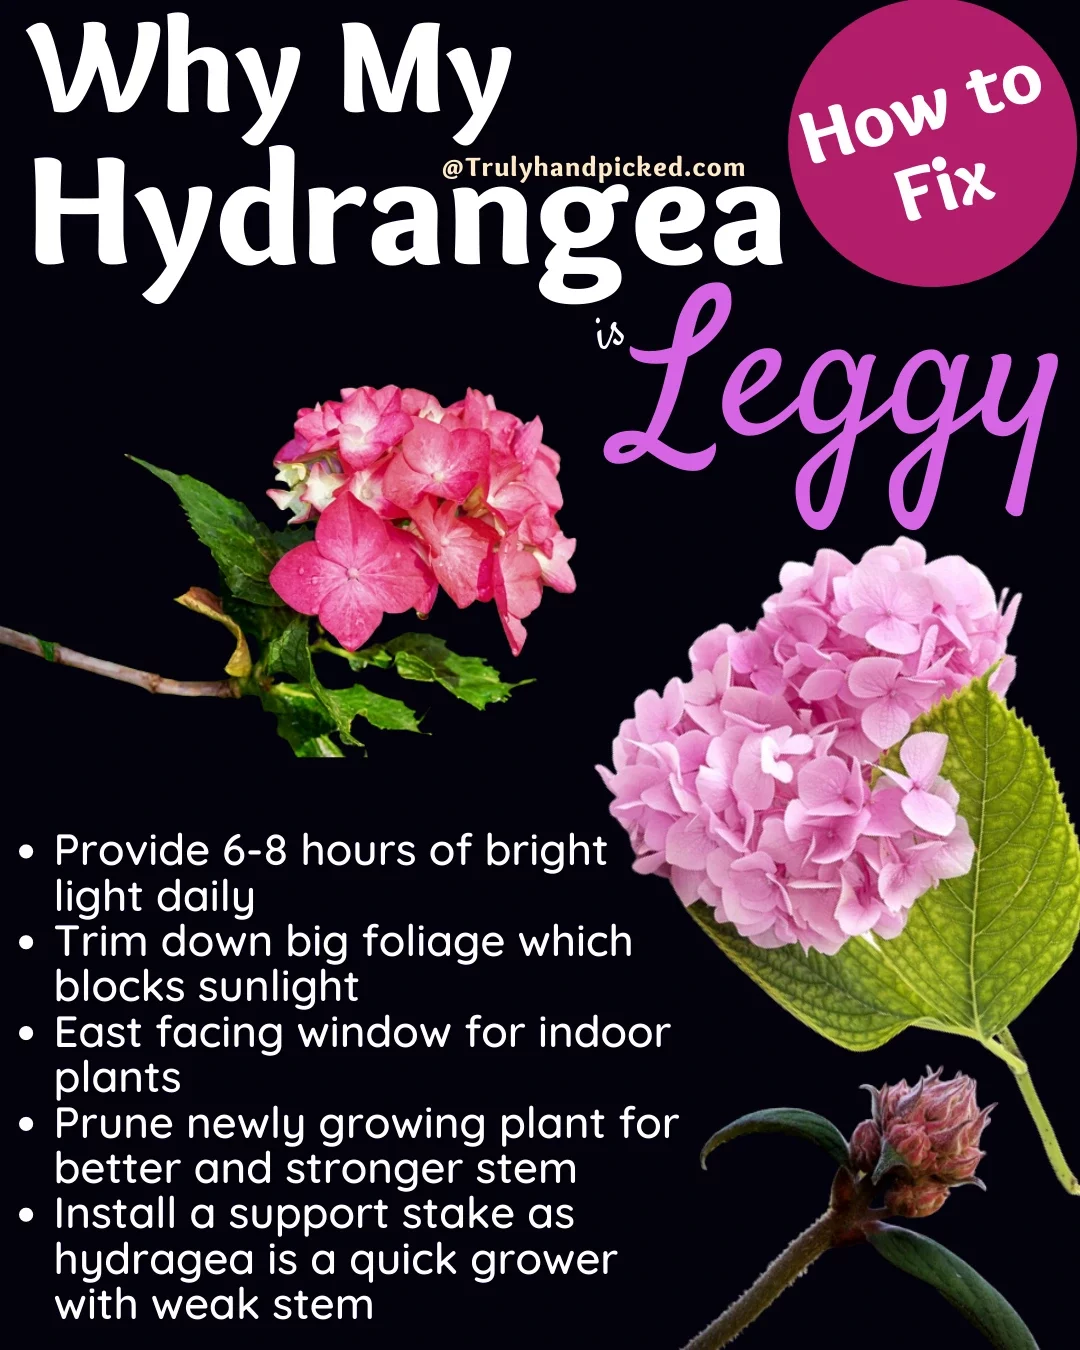 How to fix my leggy hydrangea make stems stronger for better blooms